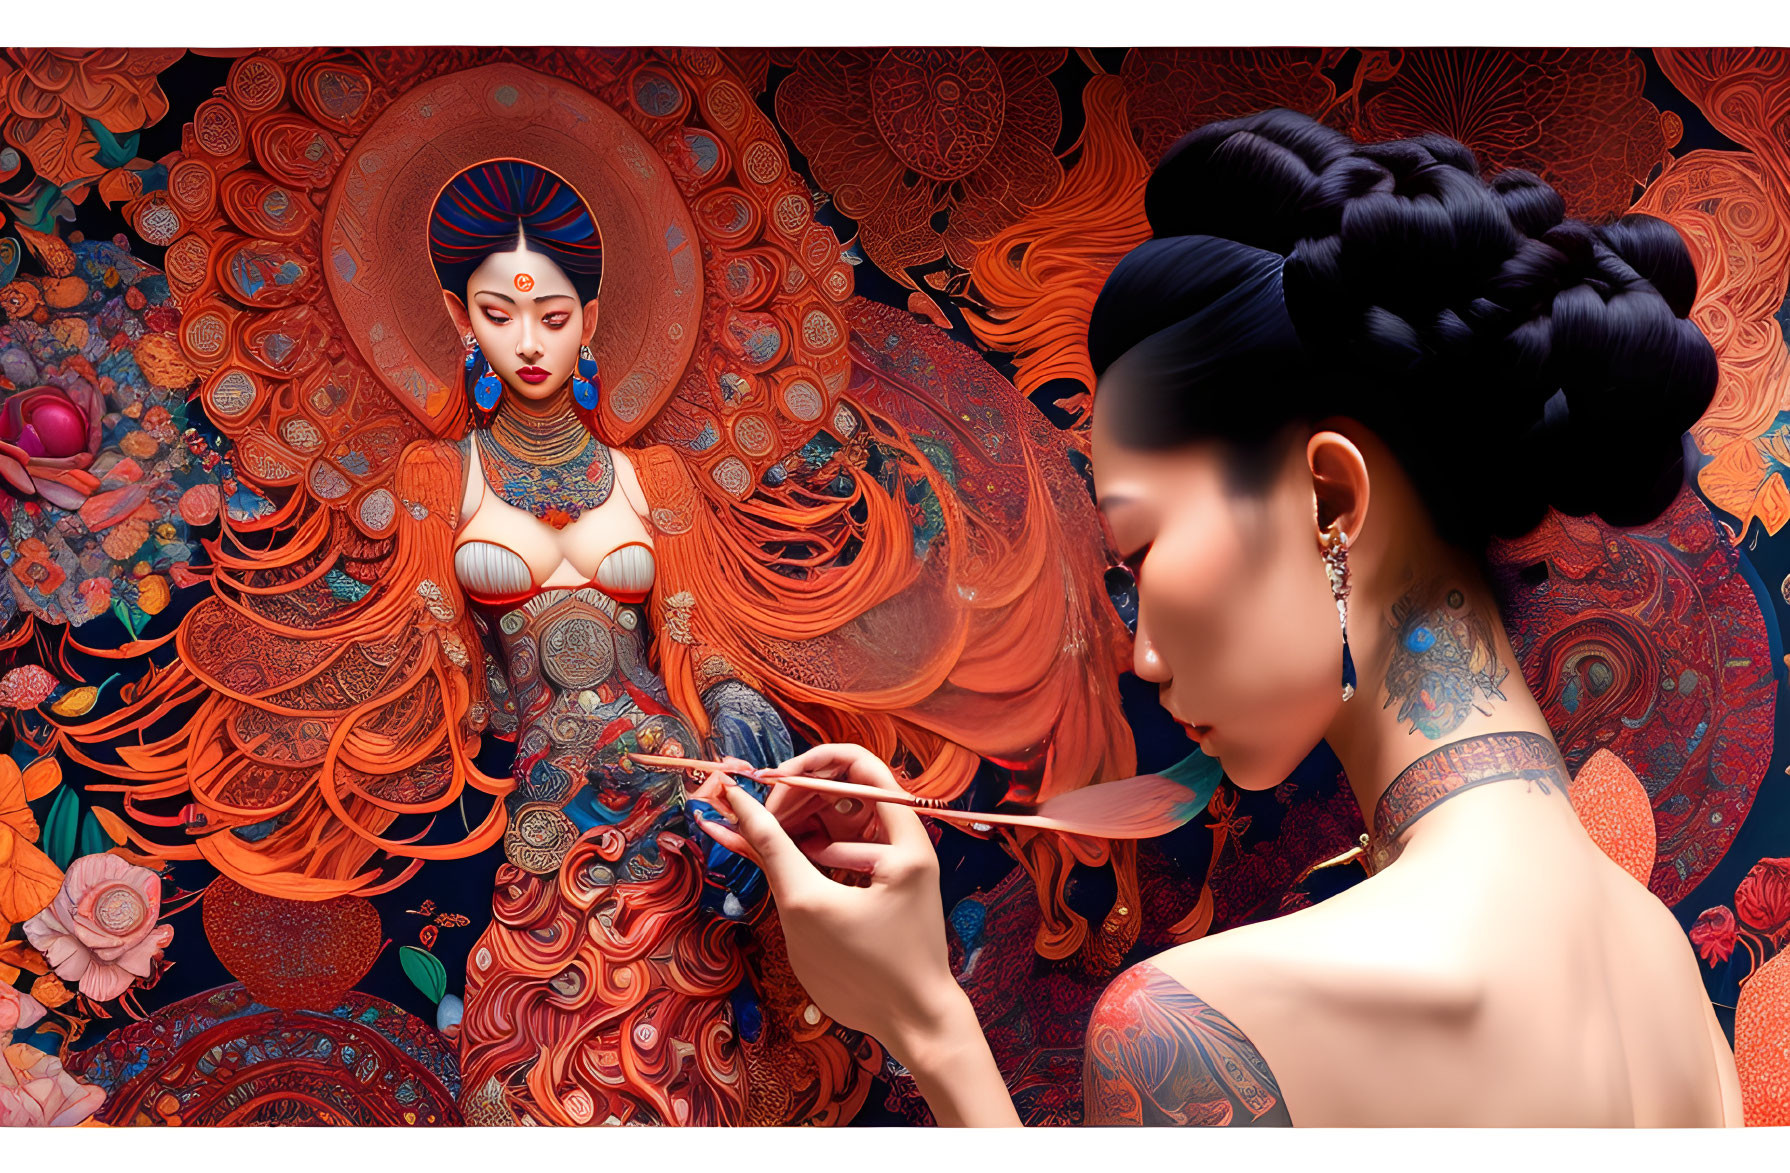 Woman painting intricate goddess mural with tattooed back